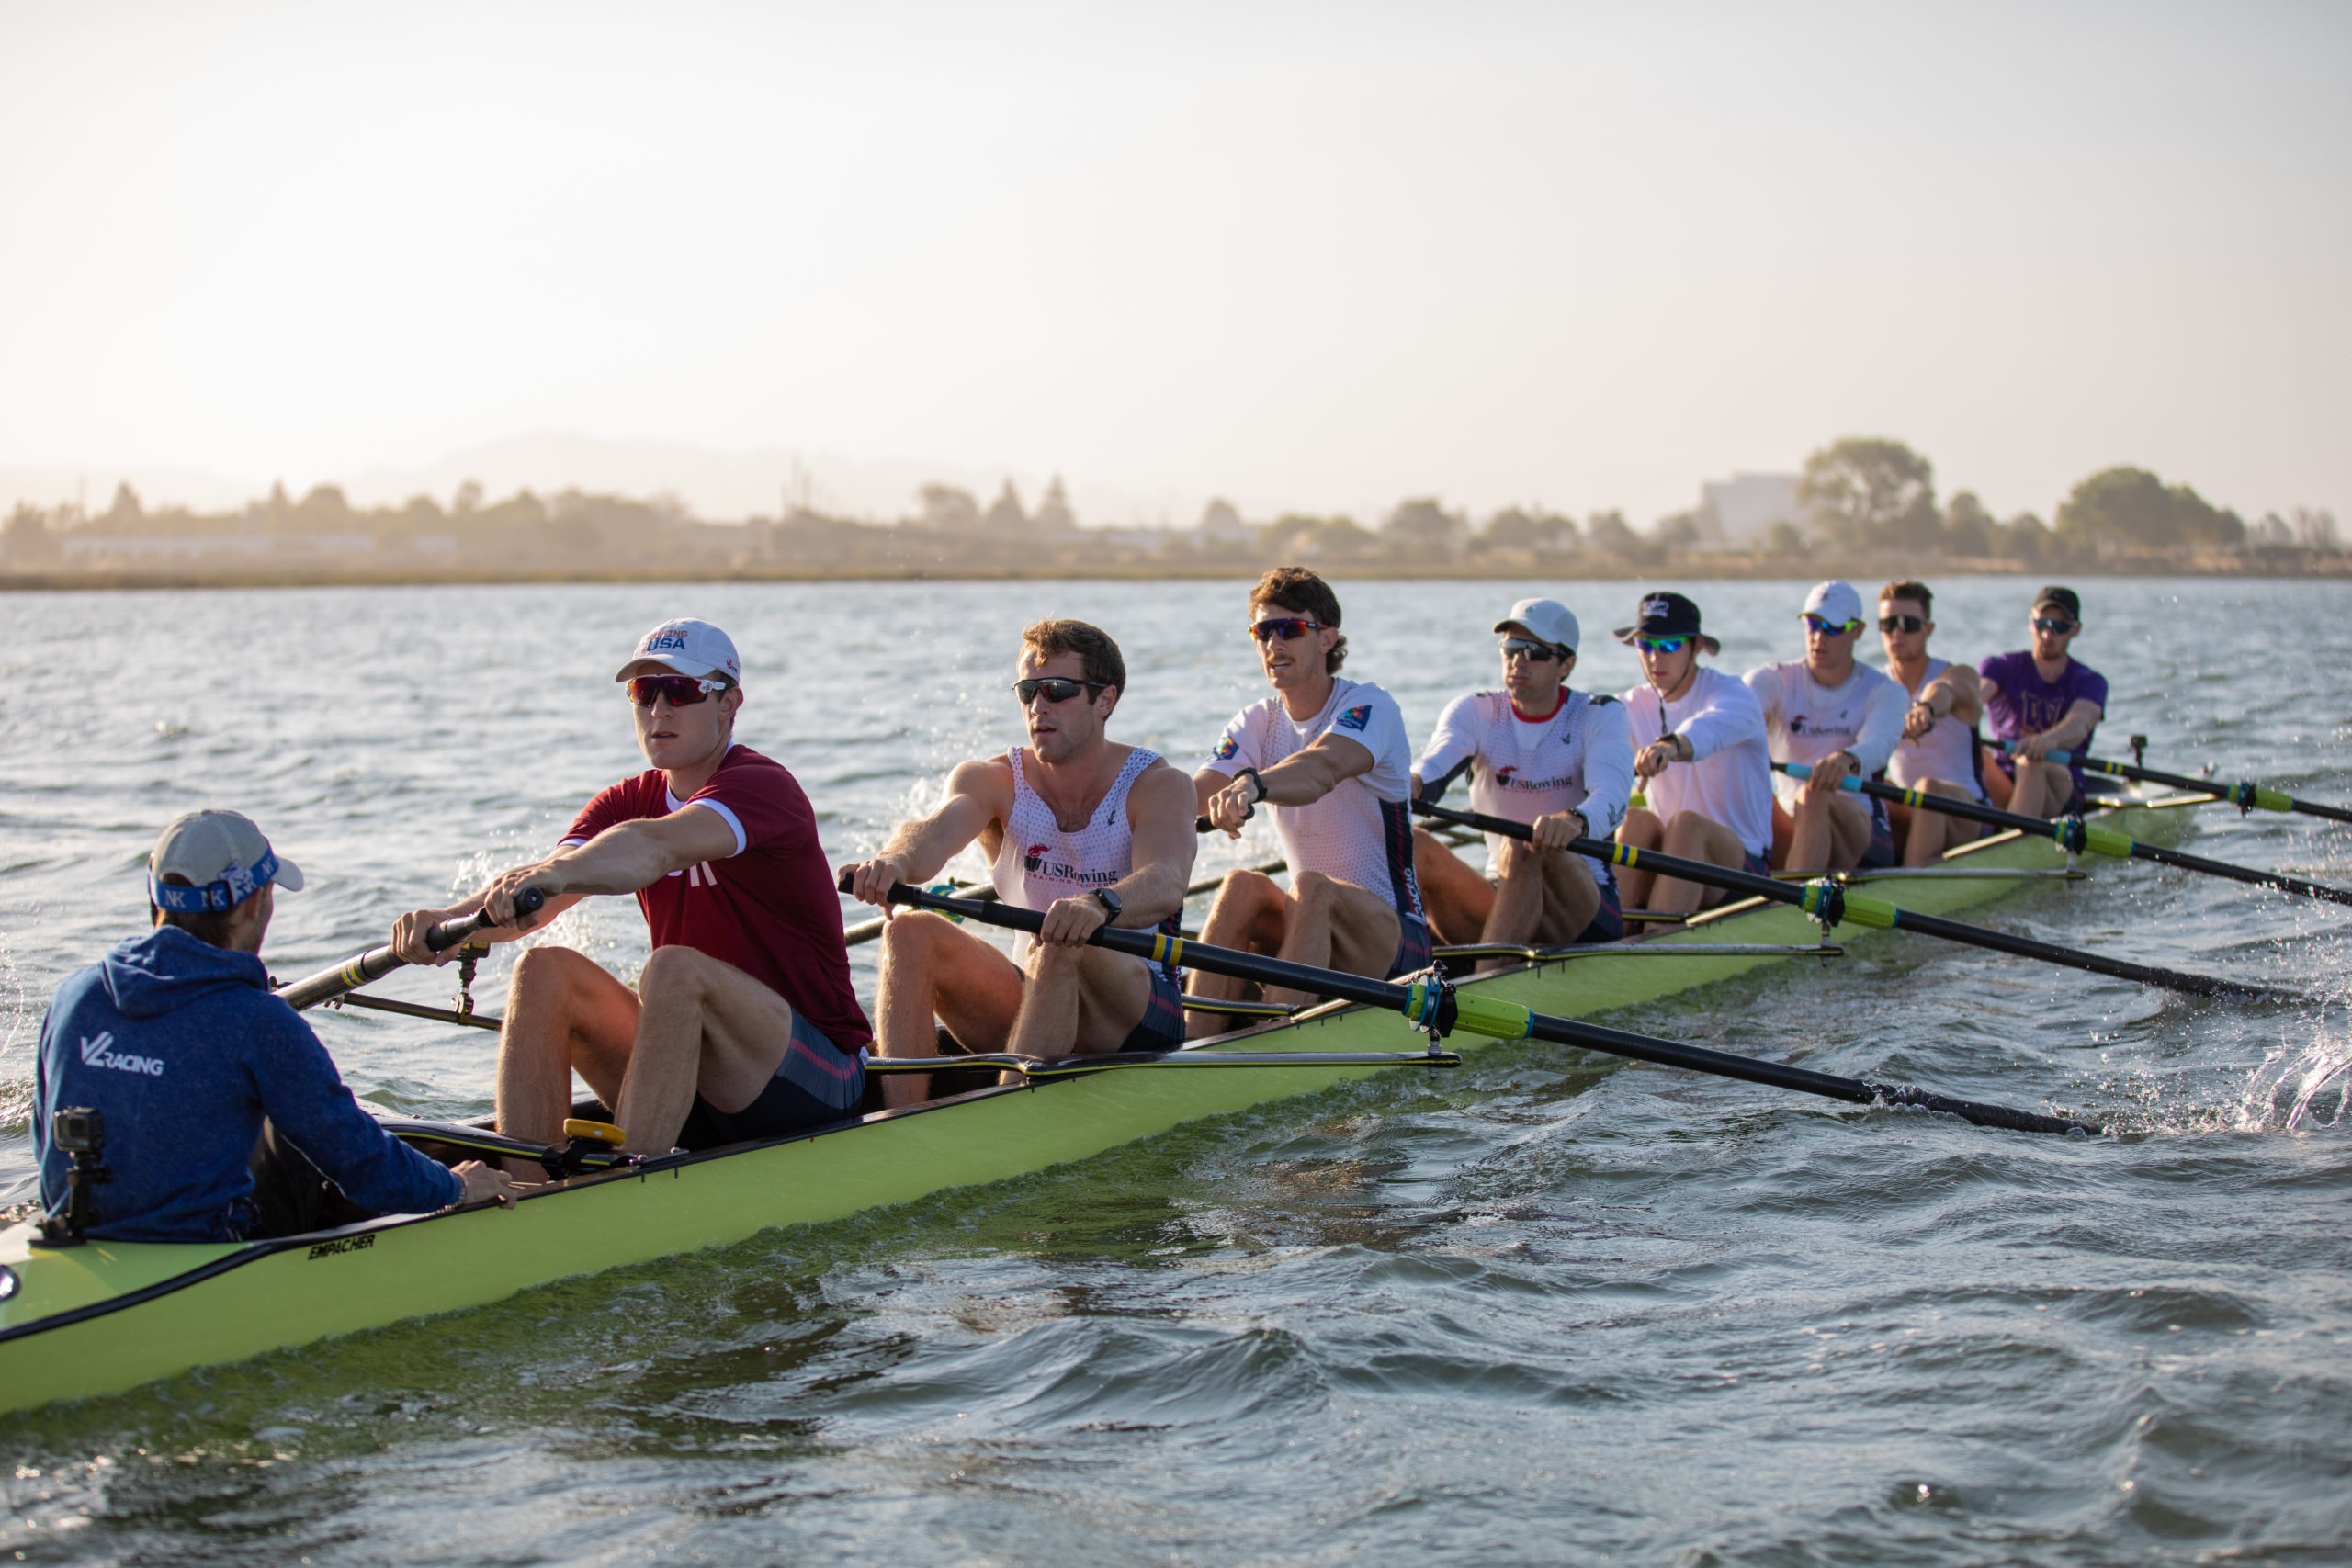 Join the Hydrow U.S. Rowing Team Challenge Hydrow